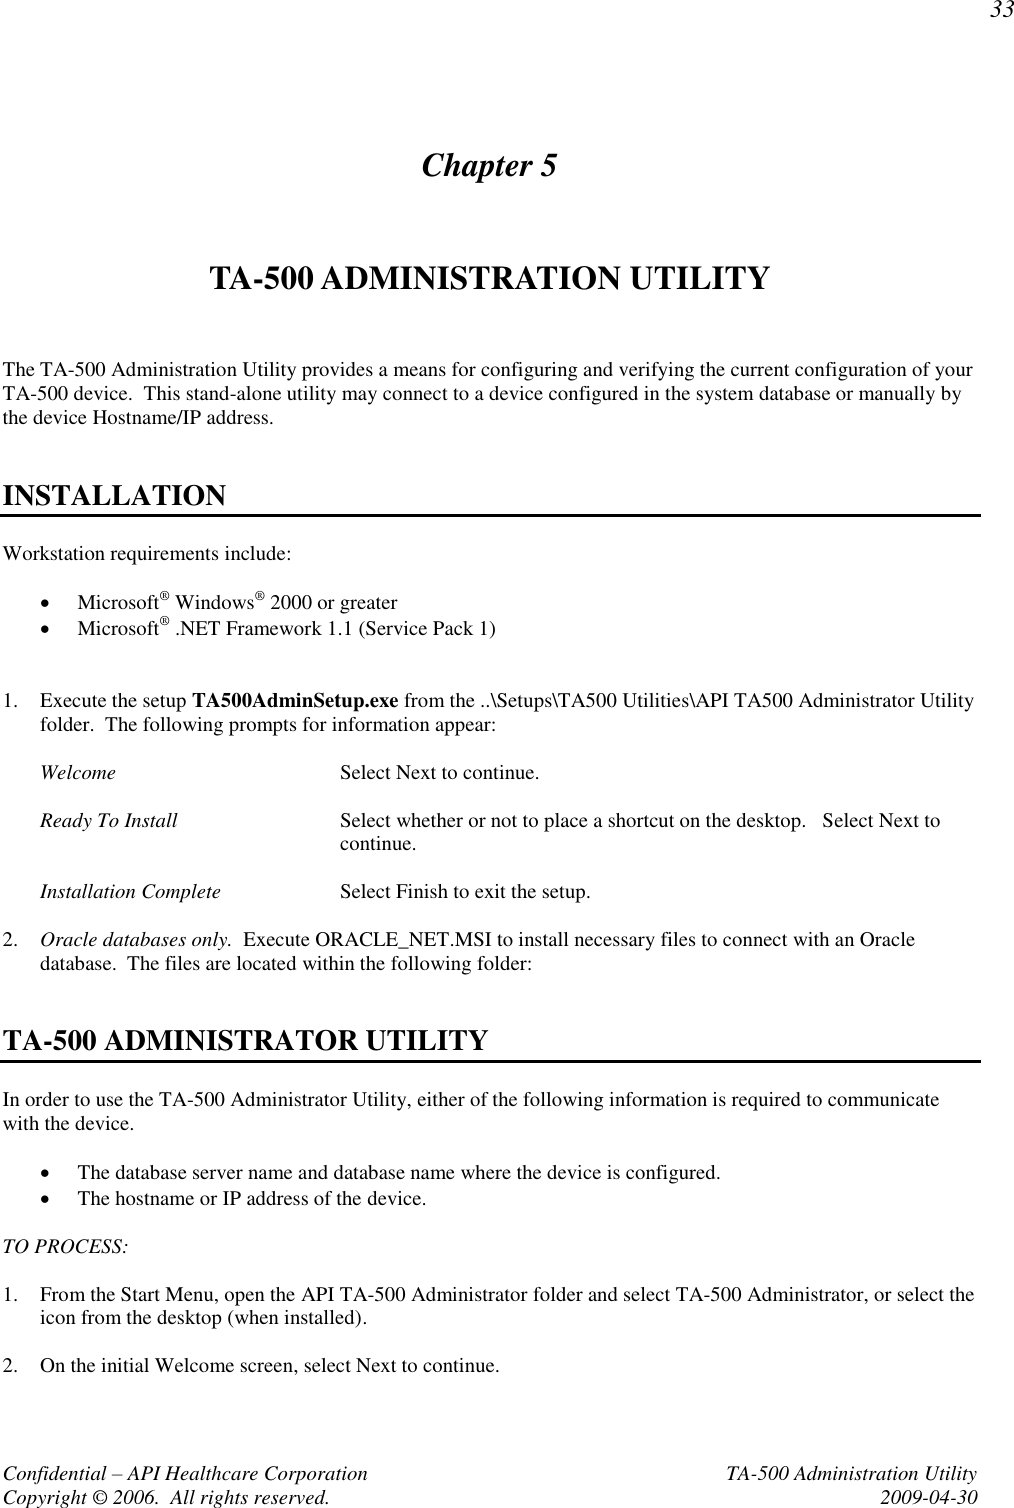 33 Confidential – API Healthcare Corporation  TA-500 Administration Utility Copyright © 2006.  All rights reserved.  2009-04-30 Chapter 5 TA-500 ADMINISTRATION UTILITY  The TA-500 Administration Utility provides a means for configuring and verifying the current configuration of your TA-500 device.  This stand-alone utility may connect to a device configured in the system database or manually by the device Hostname/IP address.    INSTALLATION Workstation requirements include:   Microsoft® Windows® 2000 or greater  Microsoft® .NET Framework 1.1 (Service Pack 1)   1. Execute the setup TA500AdminSetup.exe from the ..\Setups\TA500 Utilities\API TA500 Administrator Utility folder.  The following prompts for information appear:  Welcome  Select Next to continue.  Ready To Install  Select whether or not to place a shortcut on the desktop.   Select Next to continue.  Installation Complete  Select Finish to exit the setup.  2. Oracle databases only.  Execute ORACLE_NET.MSI to install necessary files to connect with an Oracle database.  The files are located within the following folder:   TA-500 ADMINISTRATOR UTILITY In order to use the TA-500 Administrator Utility, either of the following information is required to communicate with the device.   The database server name and database name where the device is configured.  The hostname or IP address of the device.  TO PROCESS:  1. From the Start Menu, open the API TA-500 Administrator folder and select TA-500 Administrator, or select the icon from the desktop (when installed).  2. On the initial Welcome screen, select Next to continue.  